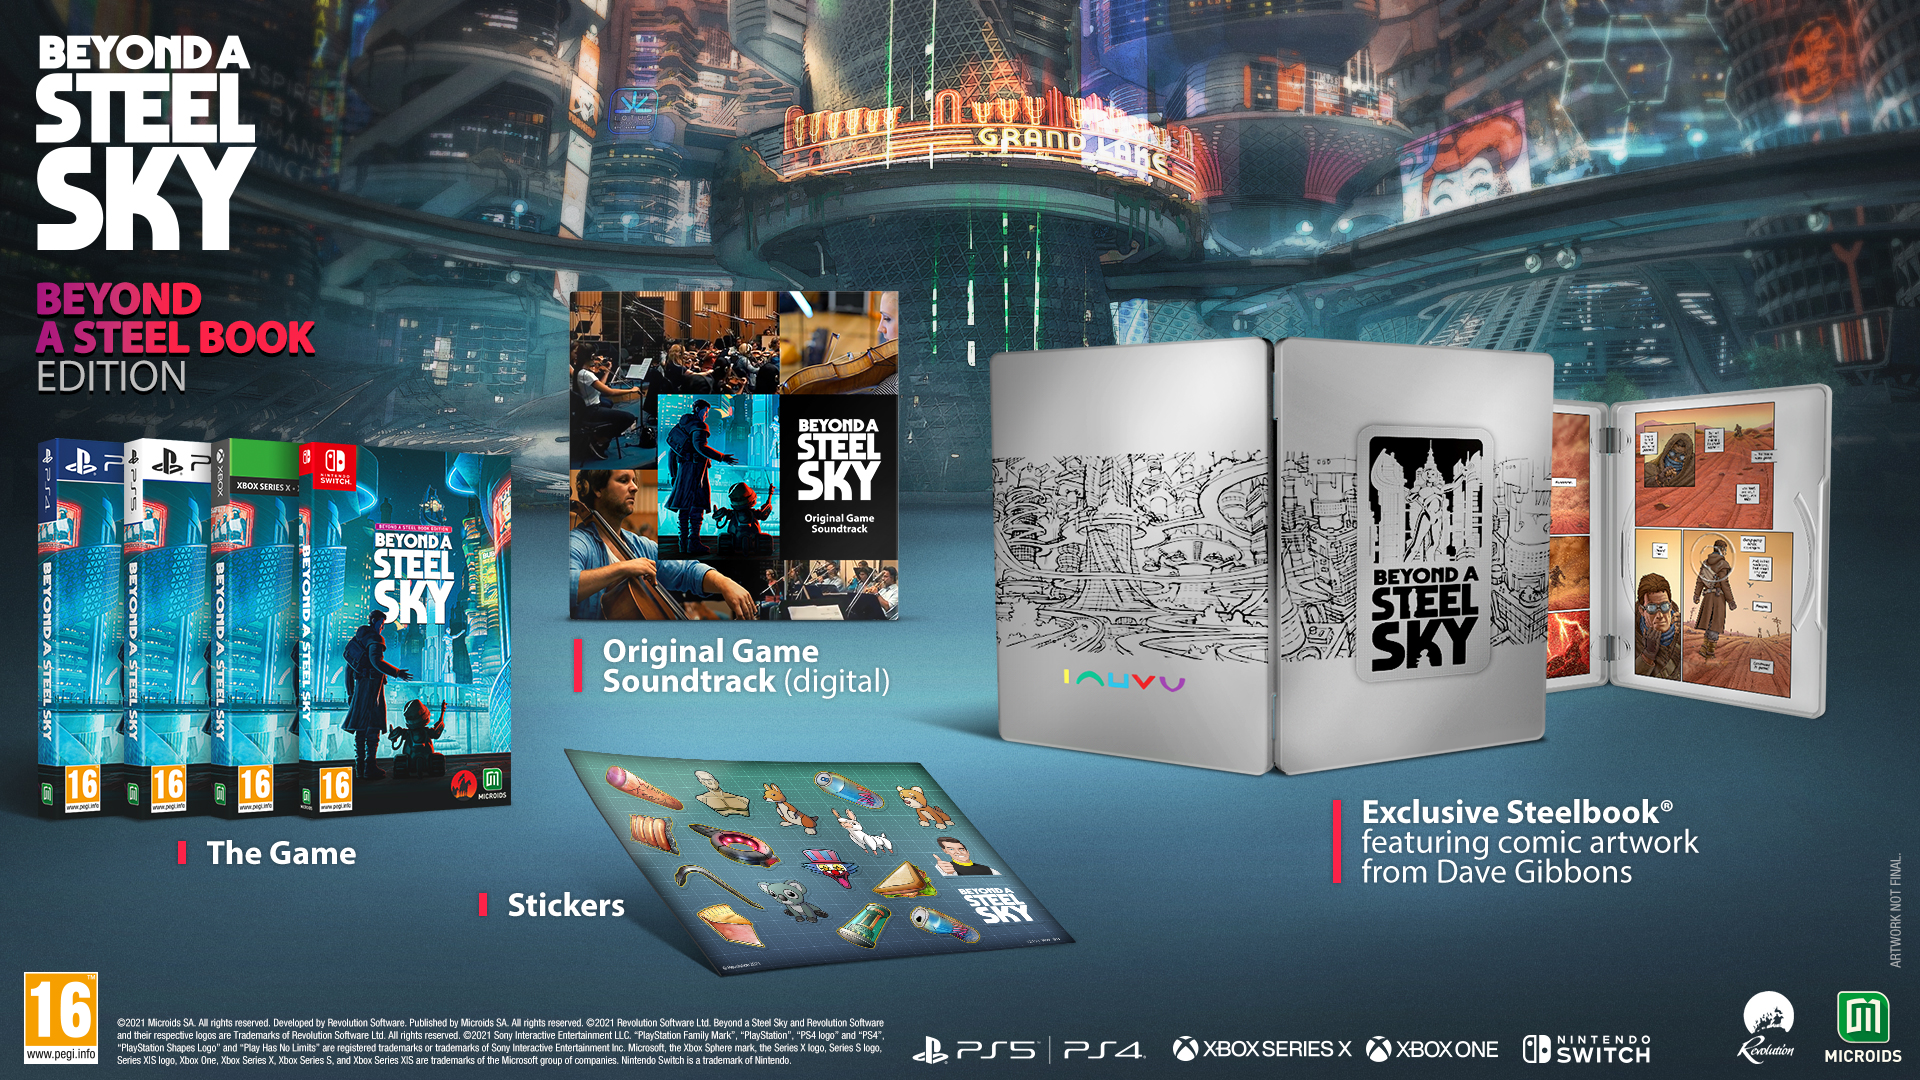 Revolution Software - Beyond A Steel Sky Utopia Edition